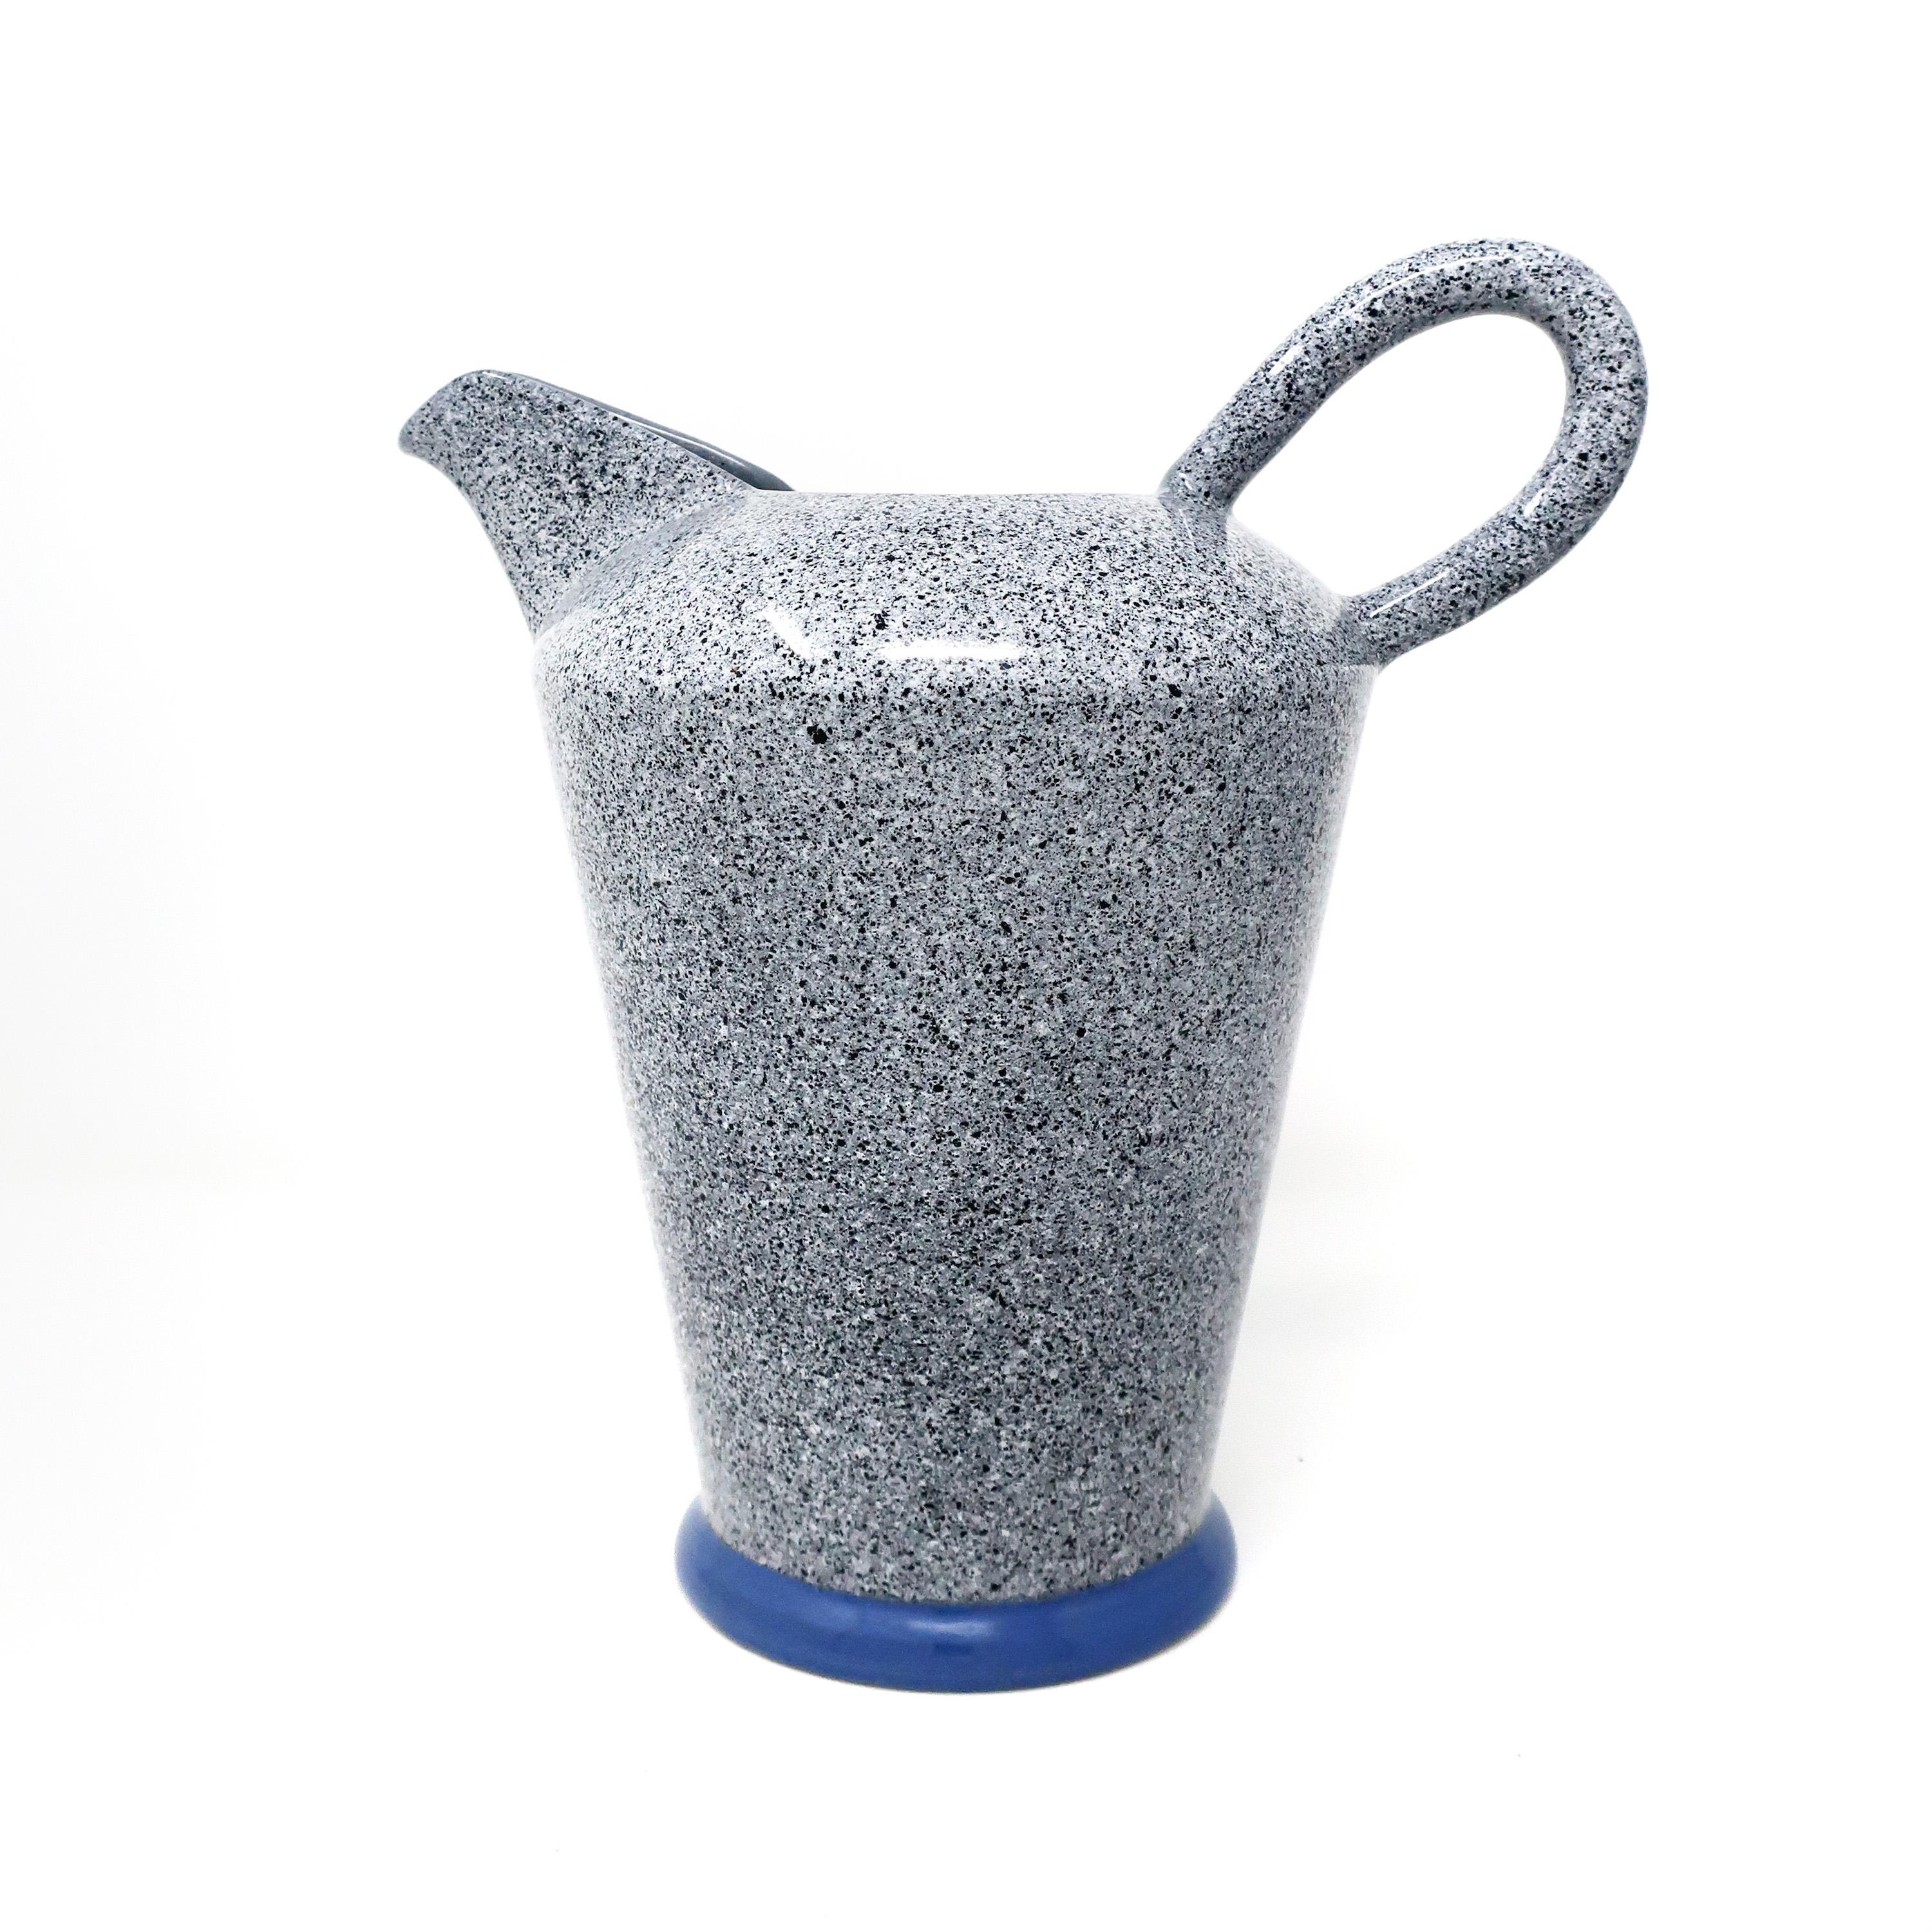 A 1980s pitcher by Italian ceramics manufacturer Baldelli. Gray, black and white speckled exterior, solid gray interior, and blue base.

In very good vintage condition. Signed on underside “Designed by Baldelli Italy”.

Measures: 9” x 6” x 9.5”.